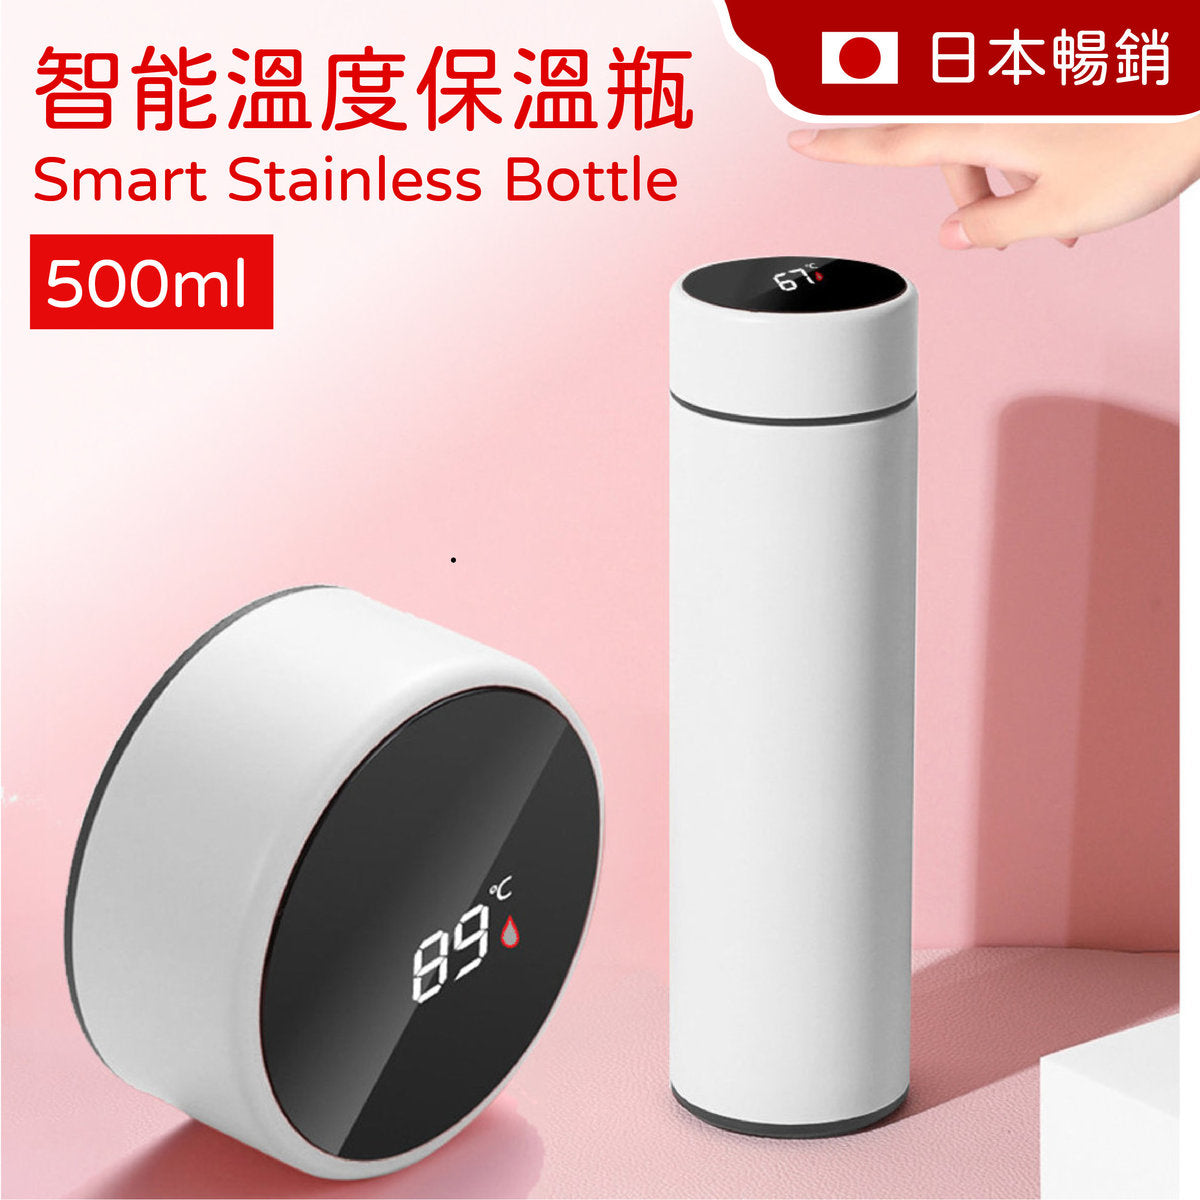 (White) 500ml Smart Temperature Display Vacuum Thermos Smart Water Bottle Stainless Steel Thermos Cup Coffee Cup Travel Cup Car Portable Temperature Display Vacuum Thermos Cup Thermos Bottle